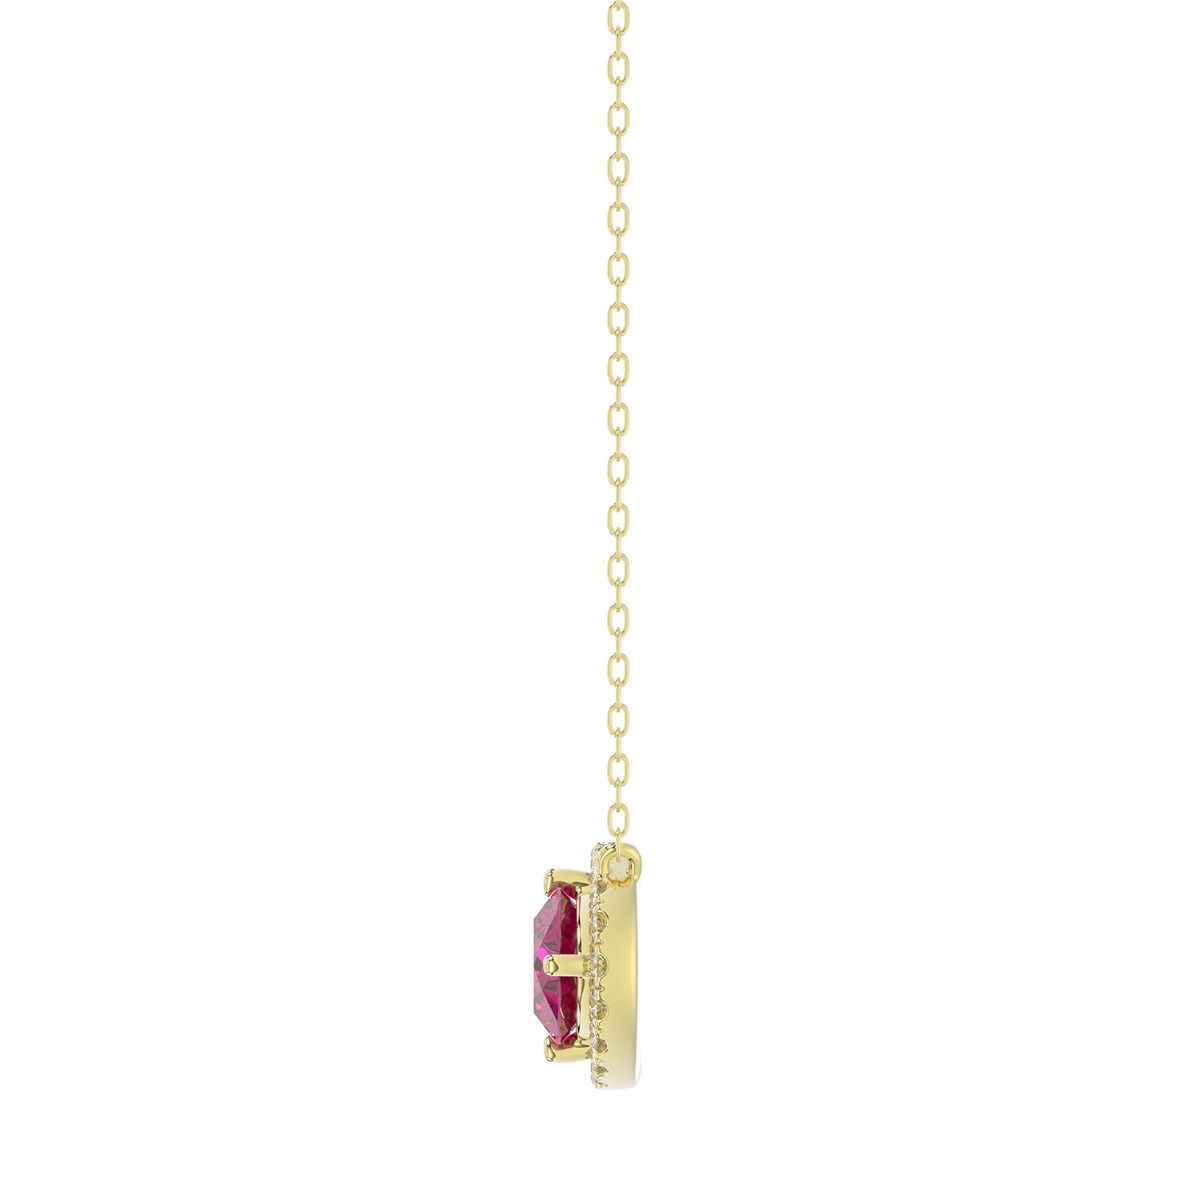 18K YELLOW GOLD 1/6CT ROUND/OVAL DIAMOND LADIES NECKLACE (COLOR STONE OVAL RUBY DIAMOND 1.05CT)